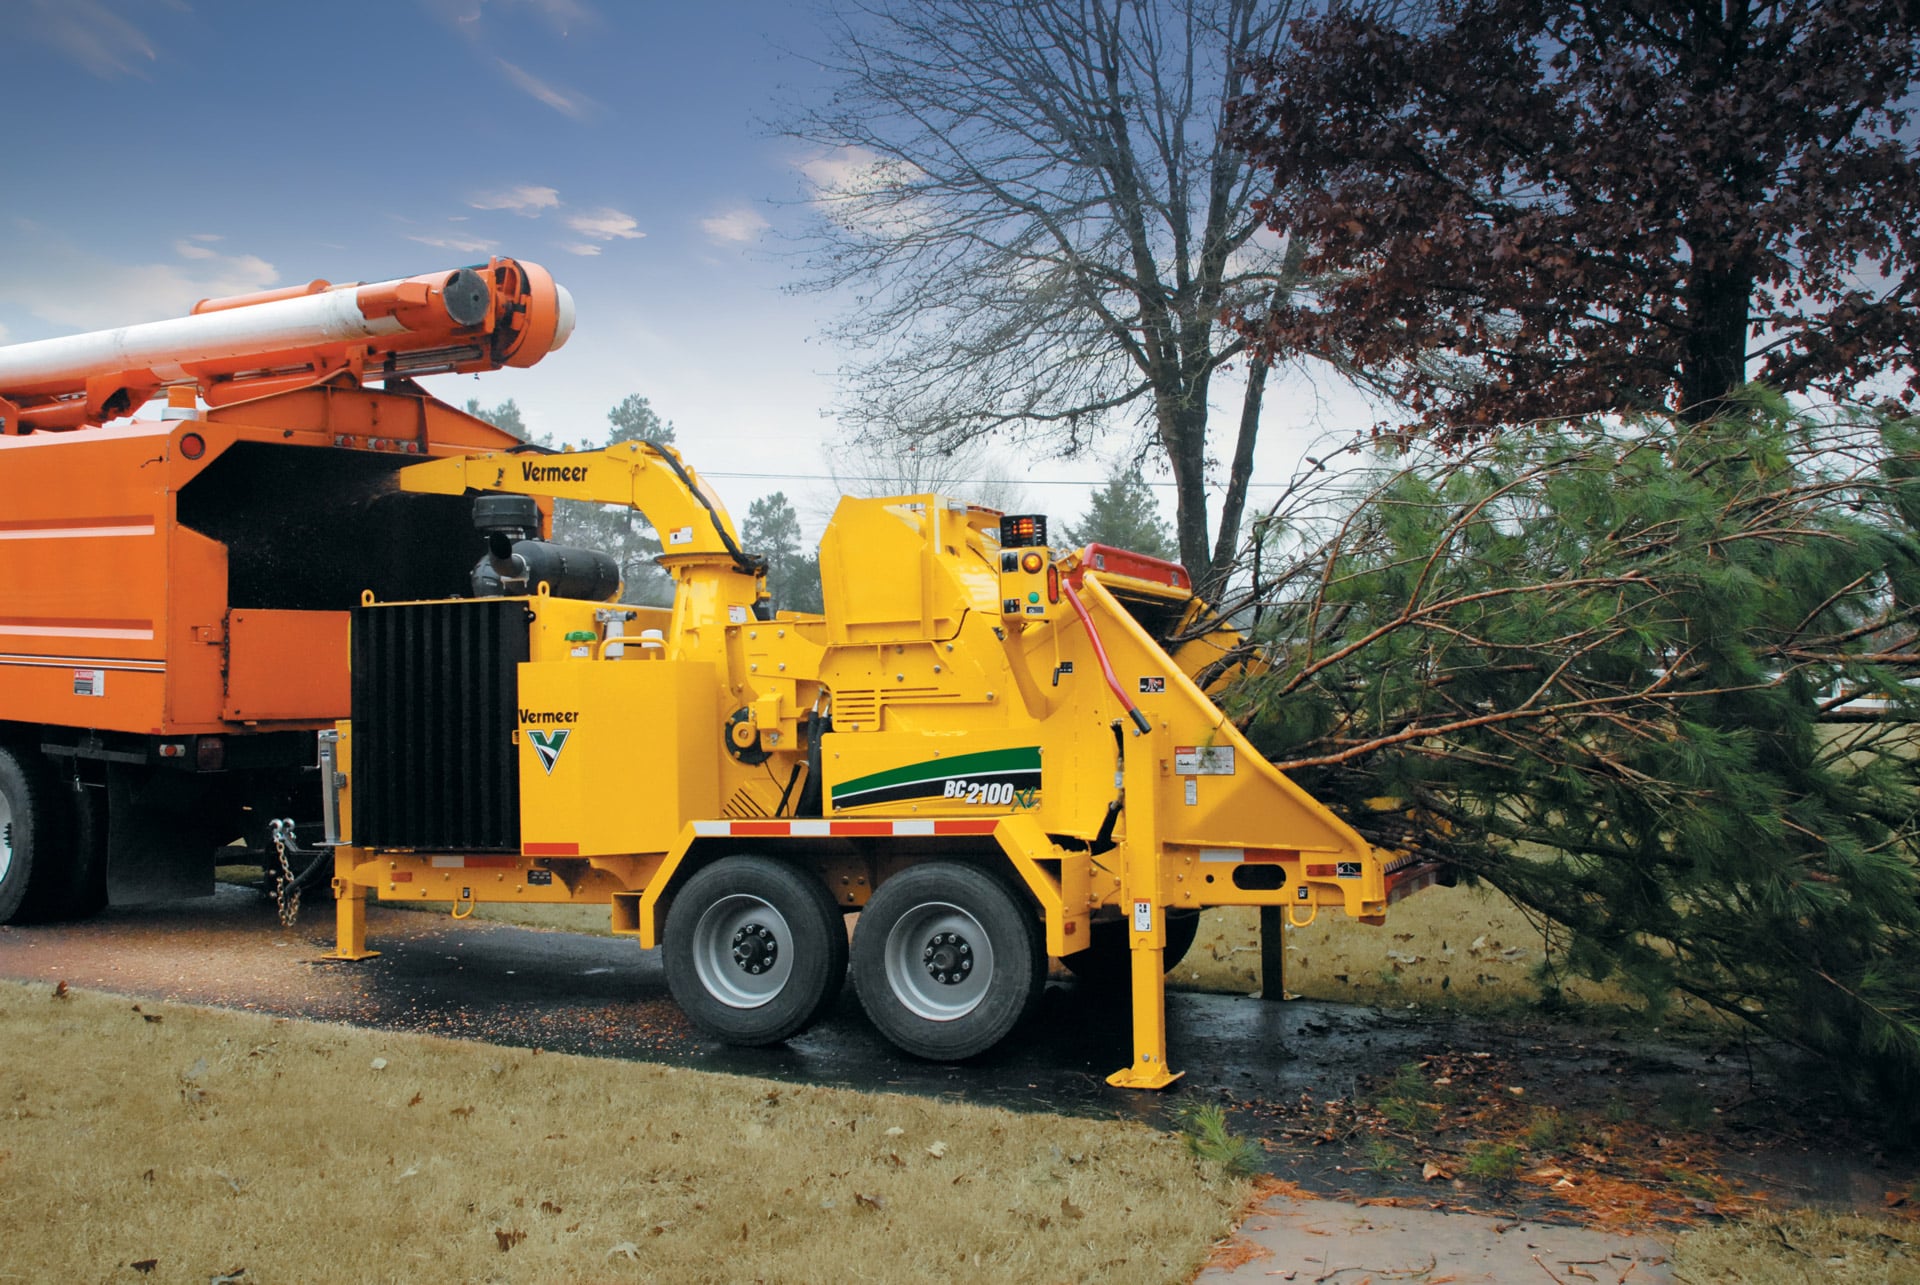 Vermeer BC1200XL Wood Chipper - high volume waste timber processing